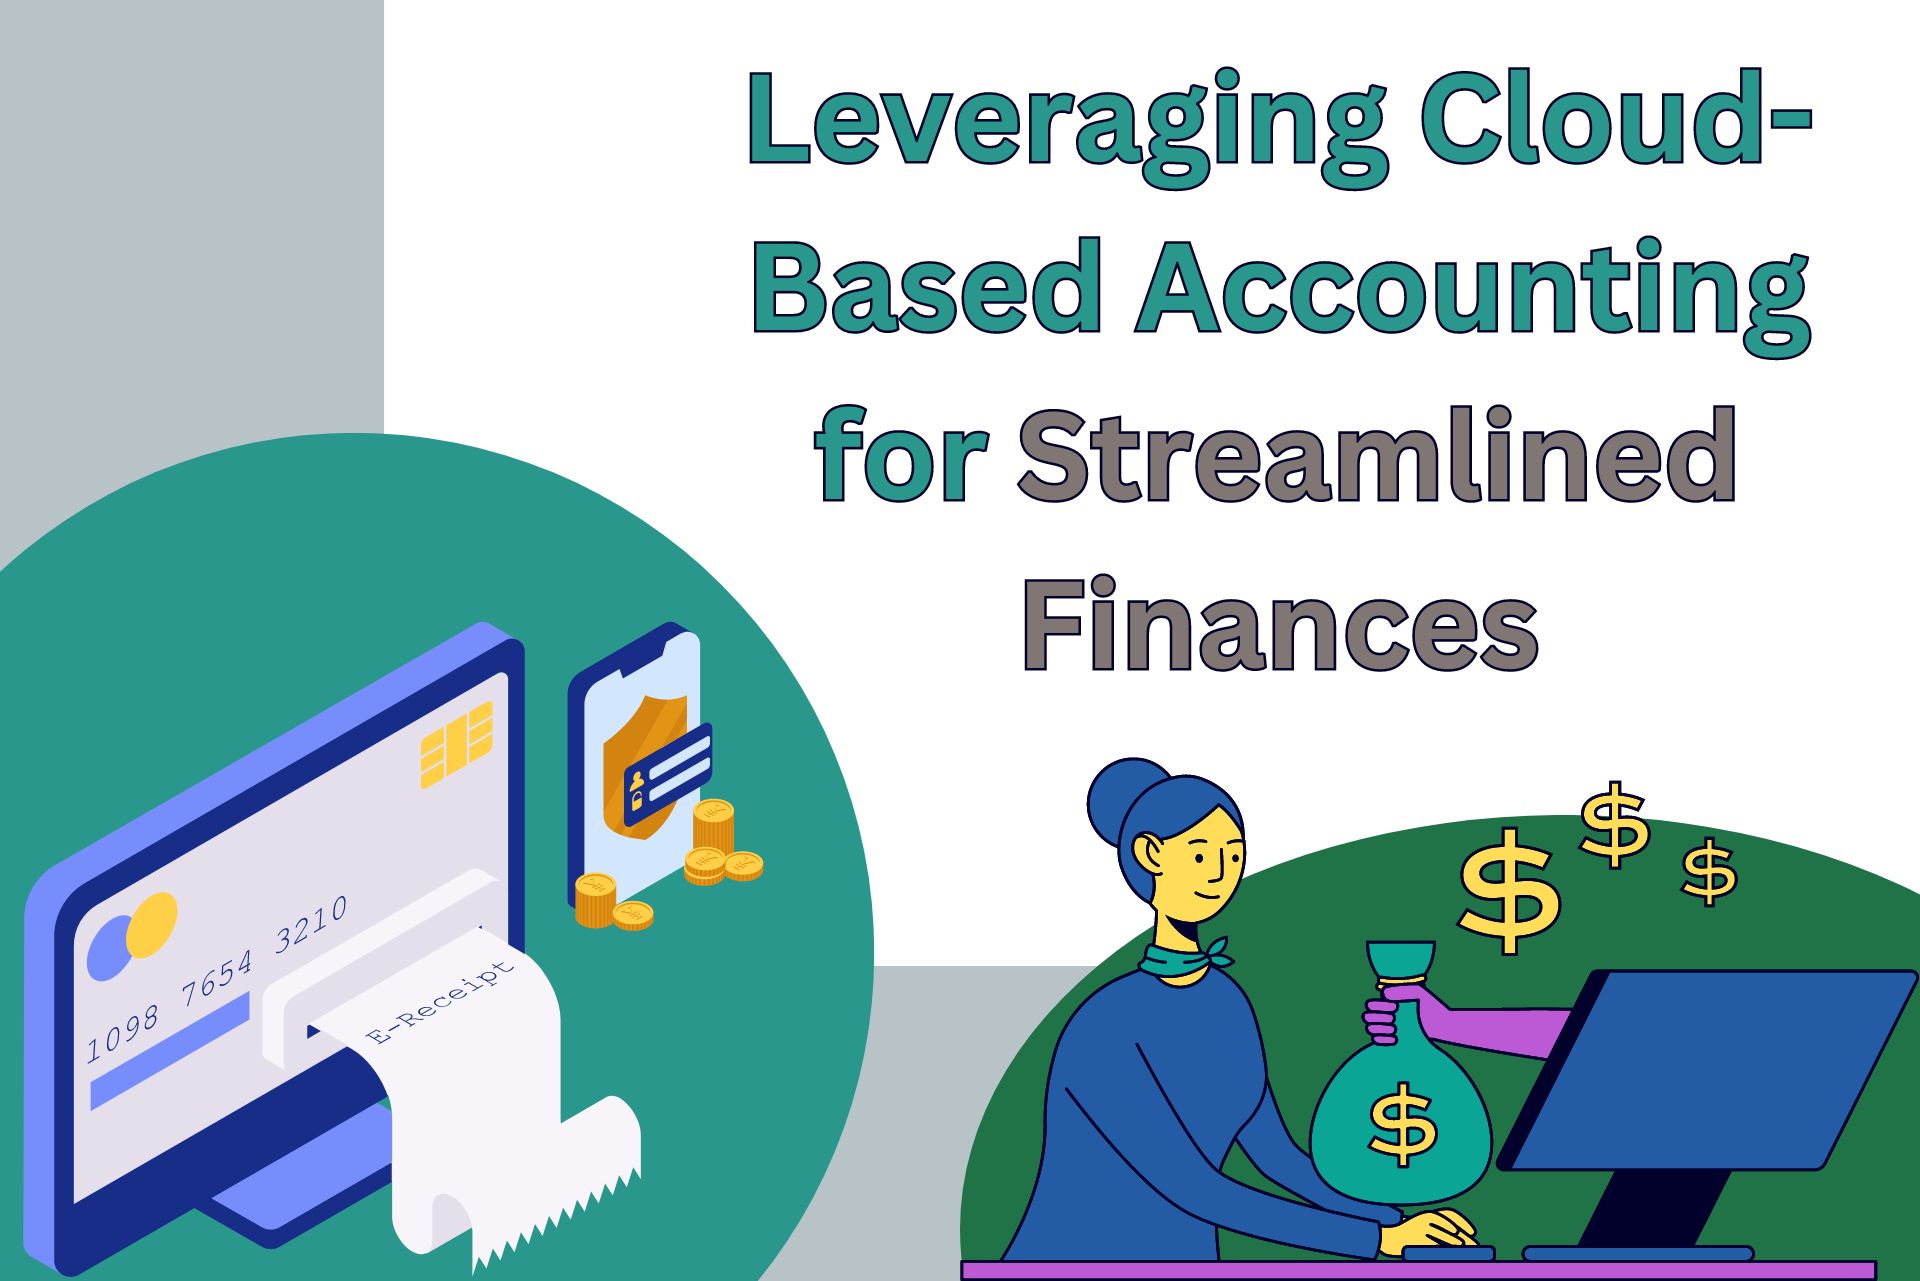 Leveraging Cloud-Based Accounting for Streamlined Finances